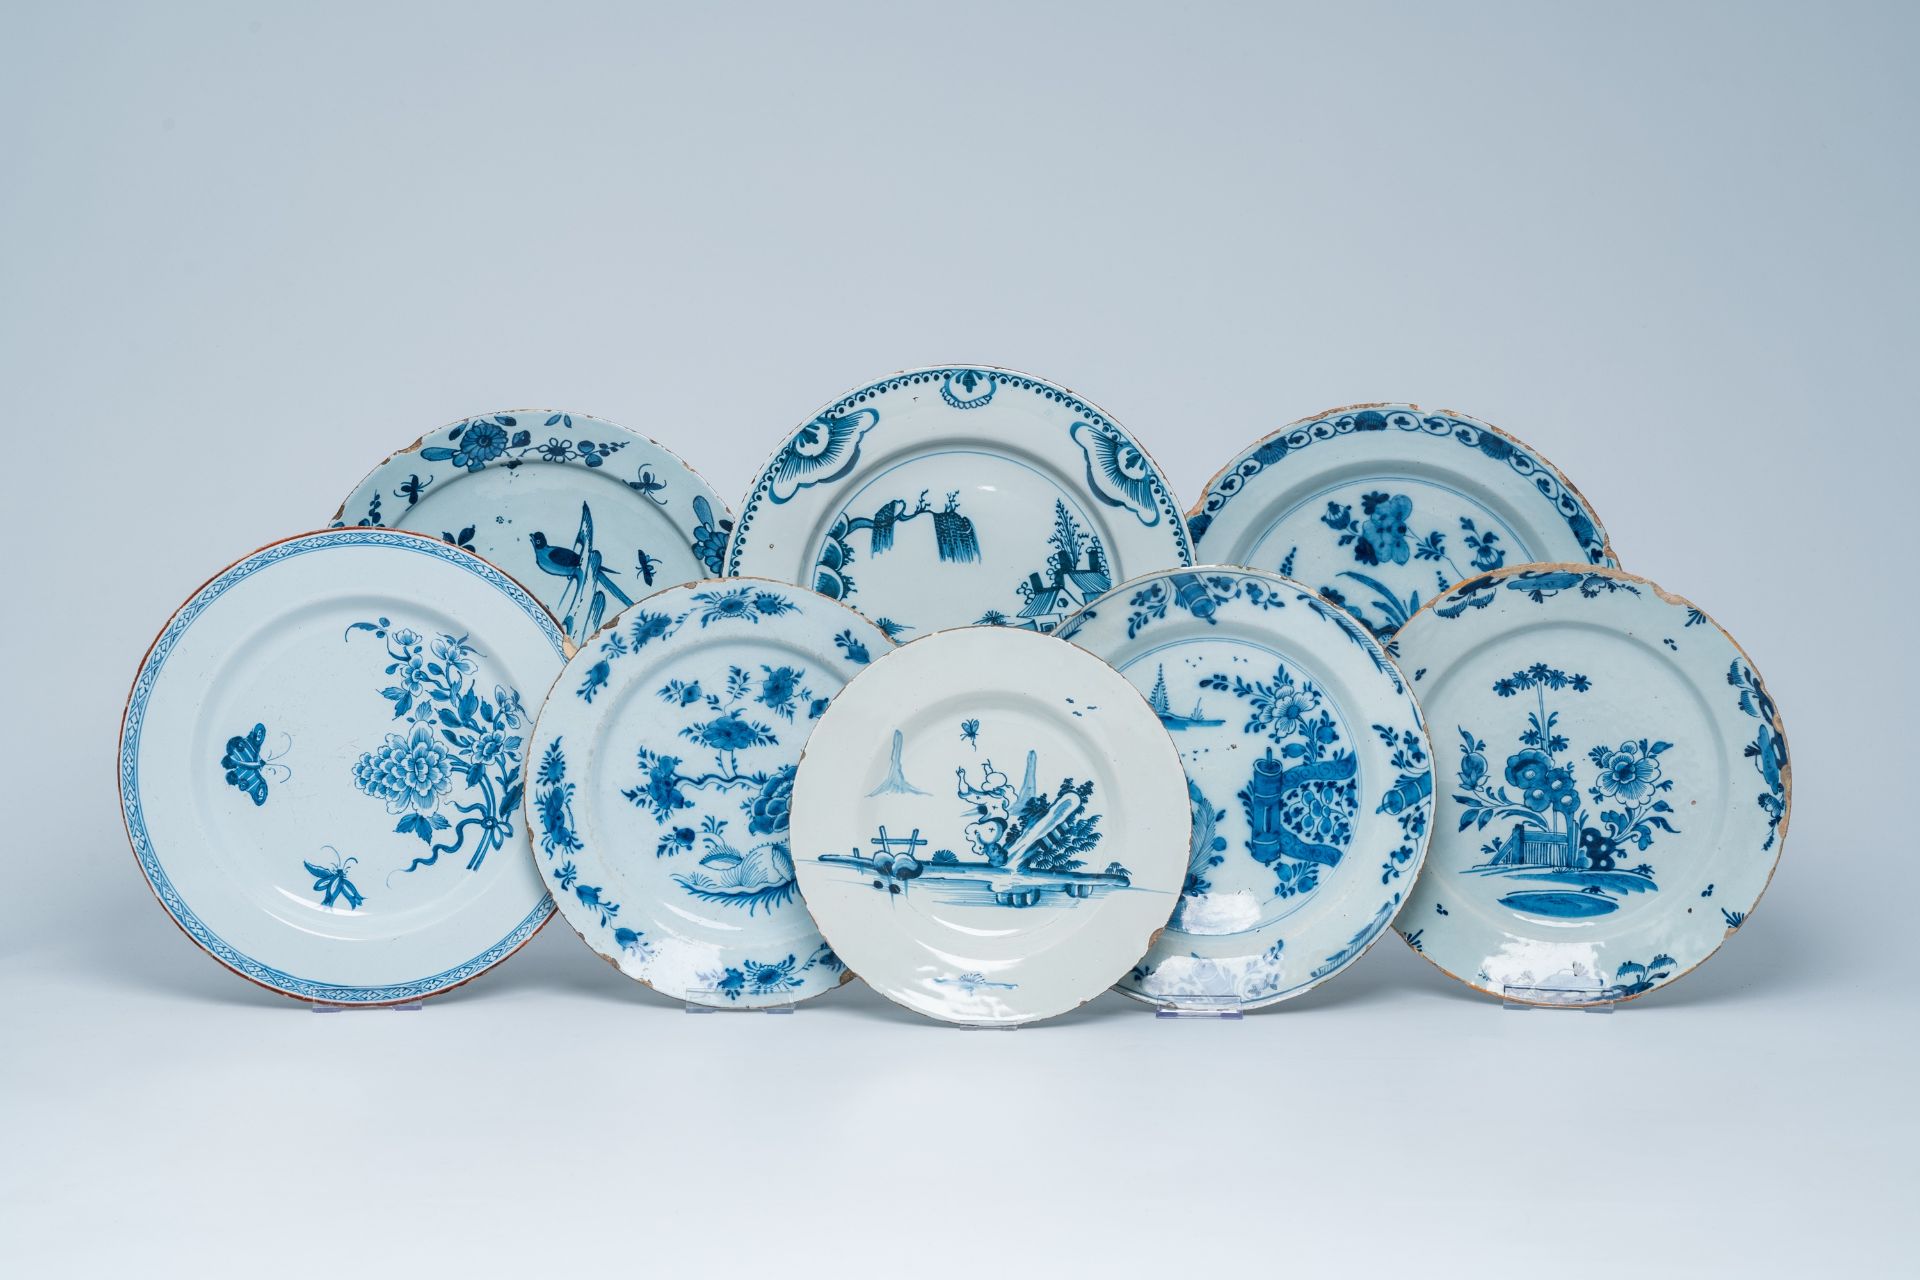 Eight blue and white Delft dishes, England and The Netherlands, 18th C.